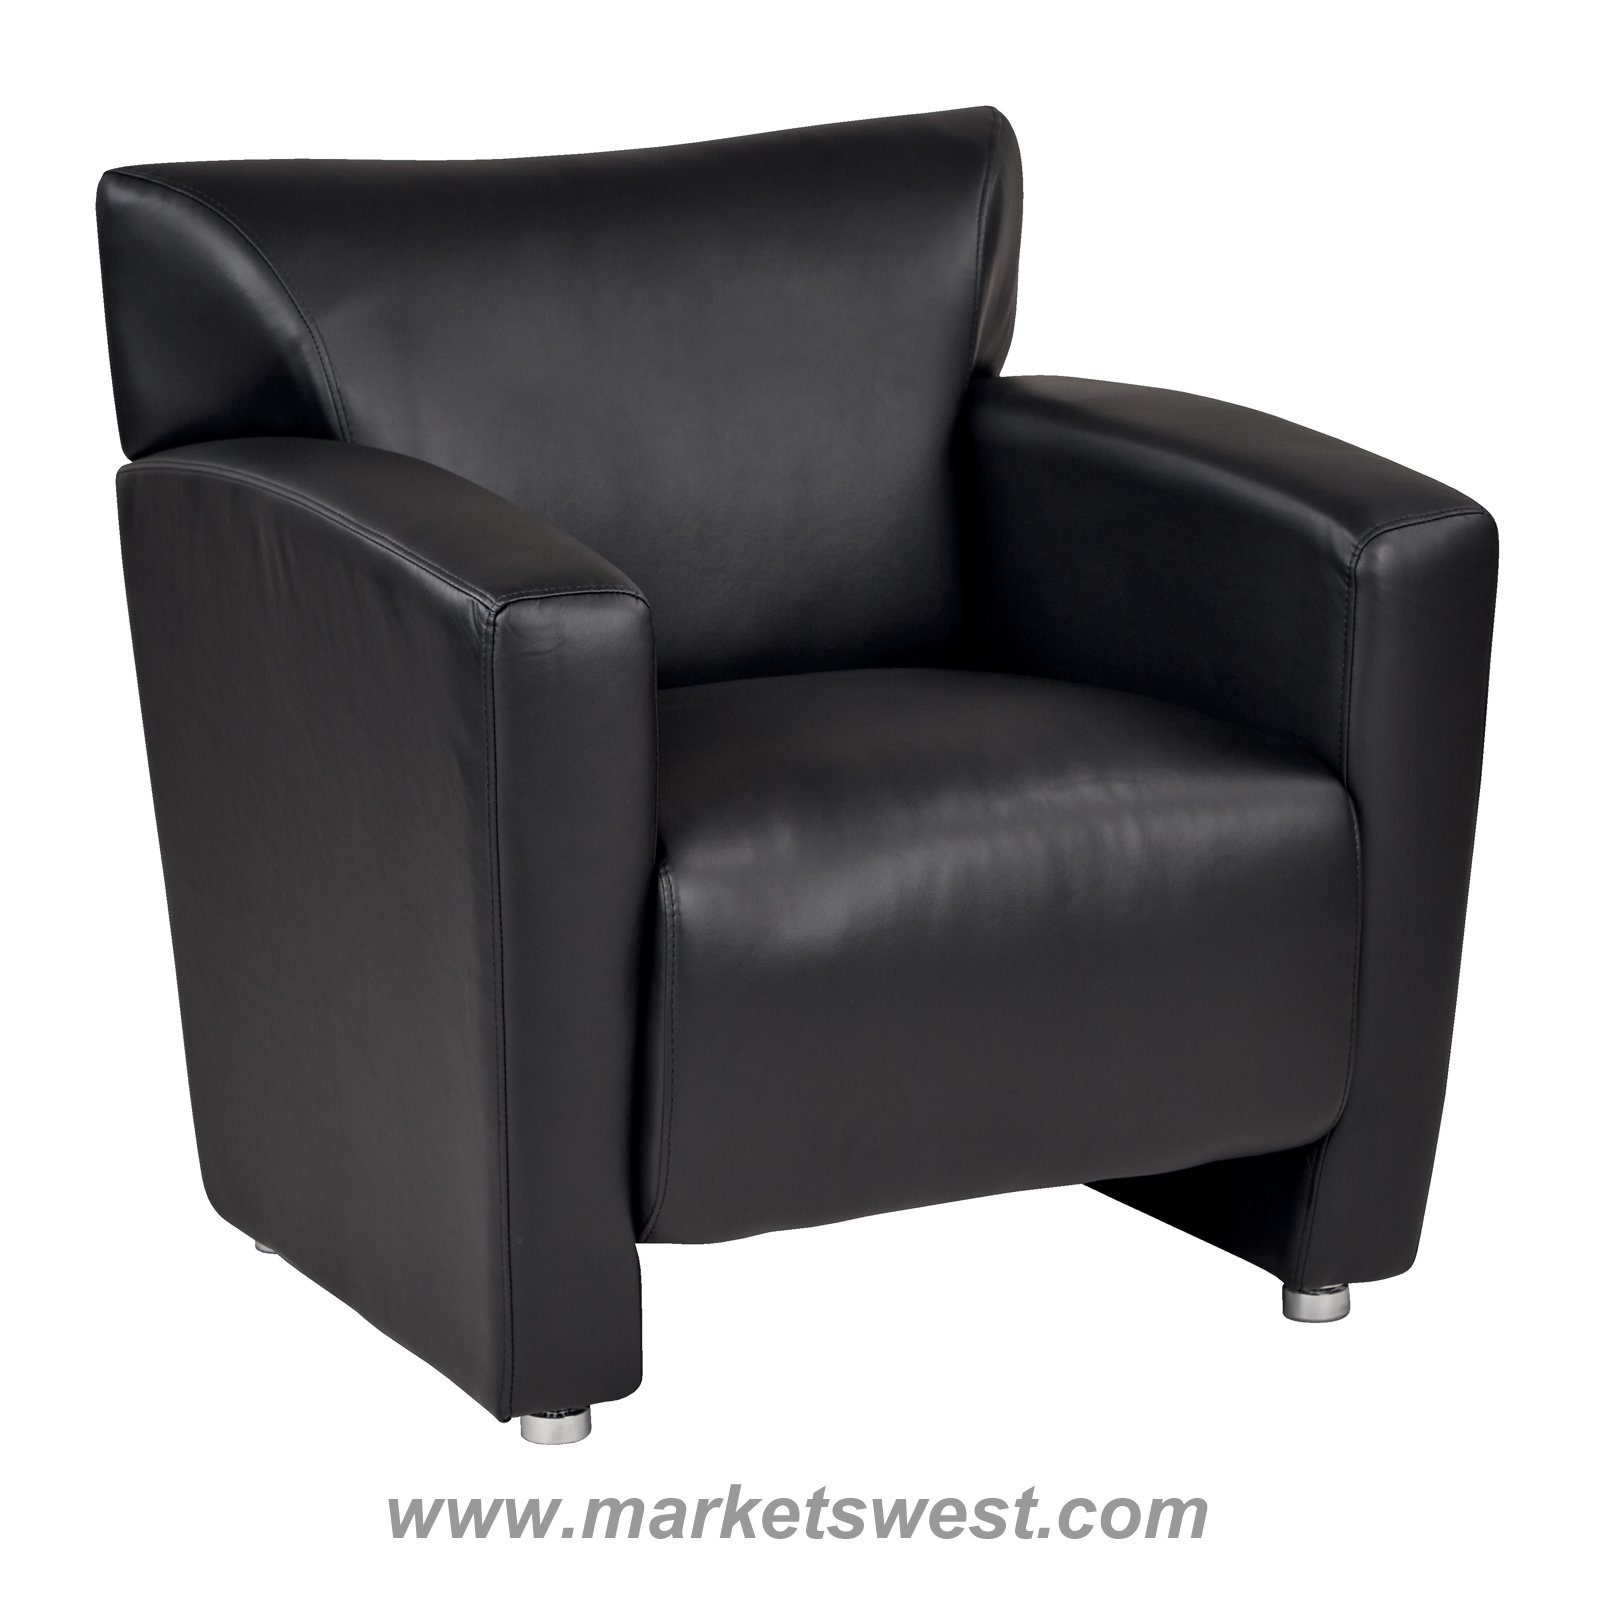 Black Faux Leather Club Chair With Silver Finish Legs